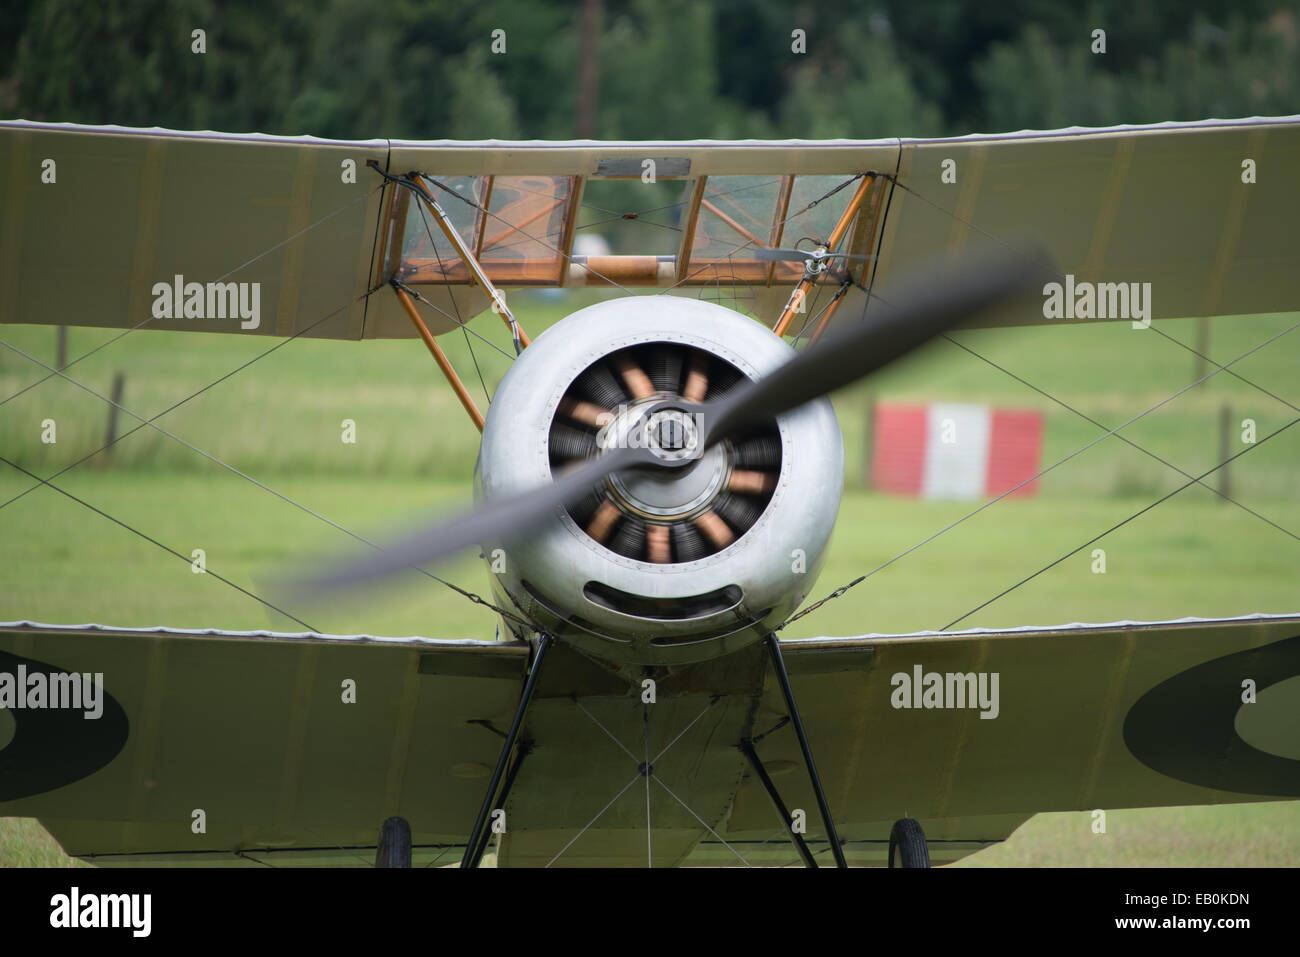 Biggleswade, UK - 29 June 2014: A vintage 1916 Sopwith Pup British fighter on display at the Shuttleworth Collection air show. Stock Photo